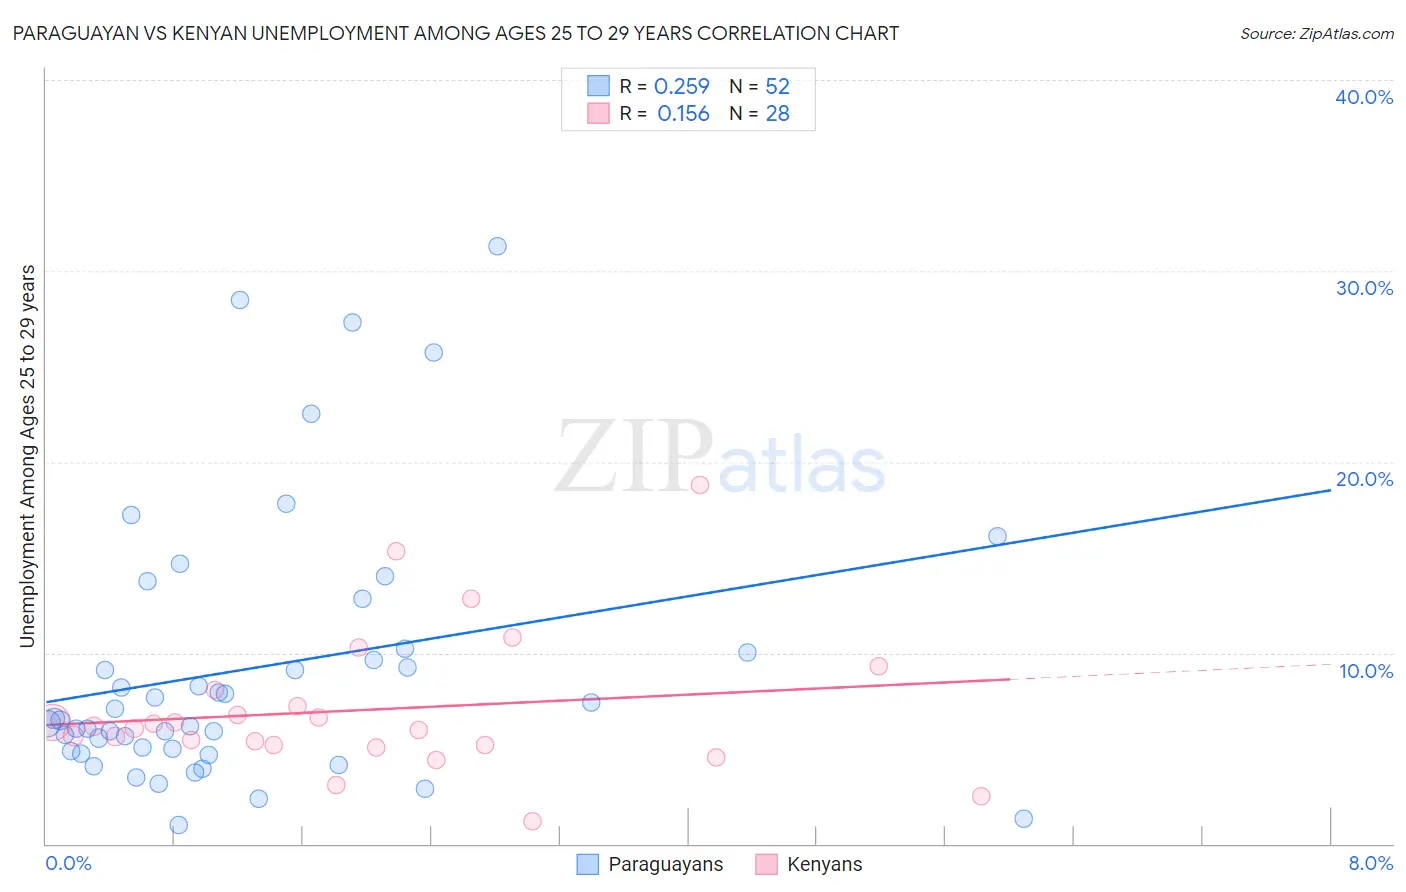 Paraguayan vs Kenyan Unemployment Among Ages 25 to 29 years